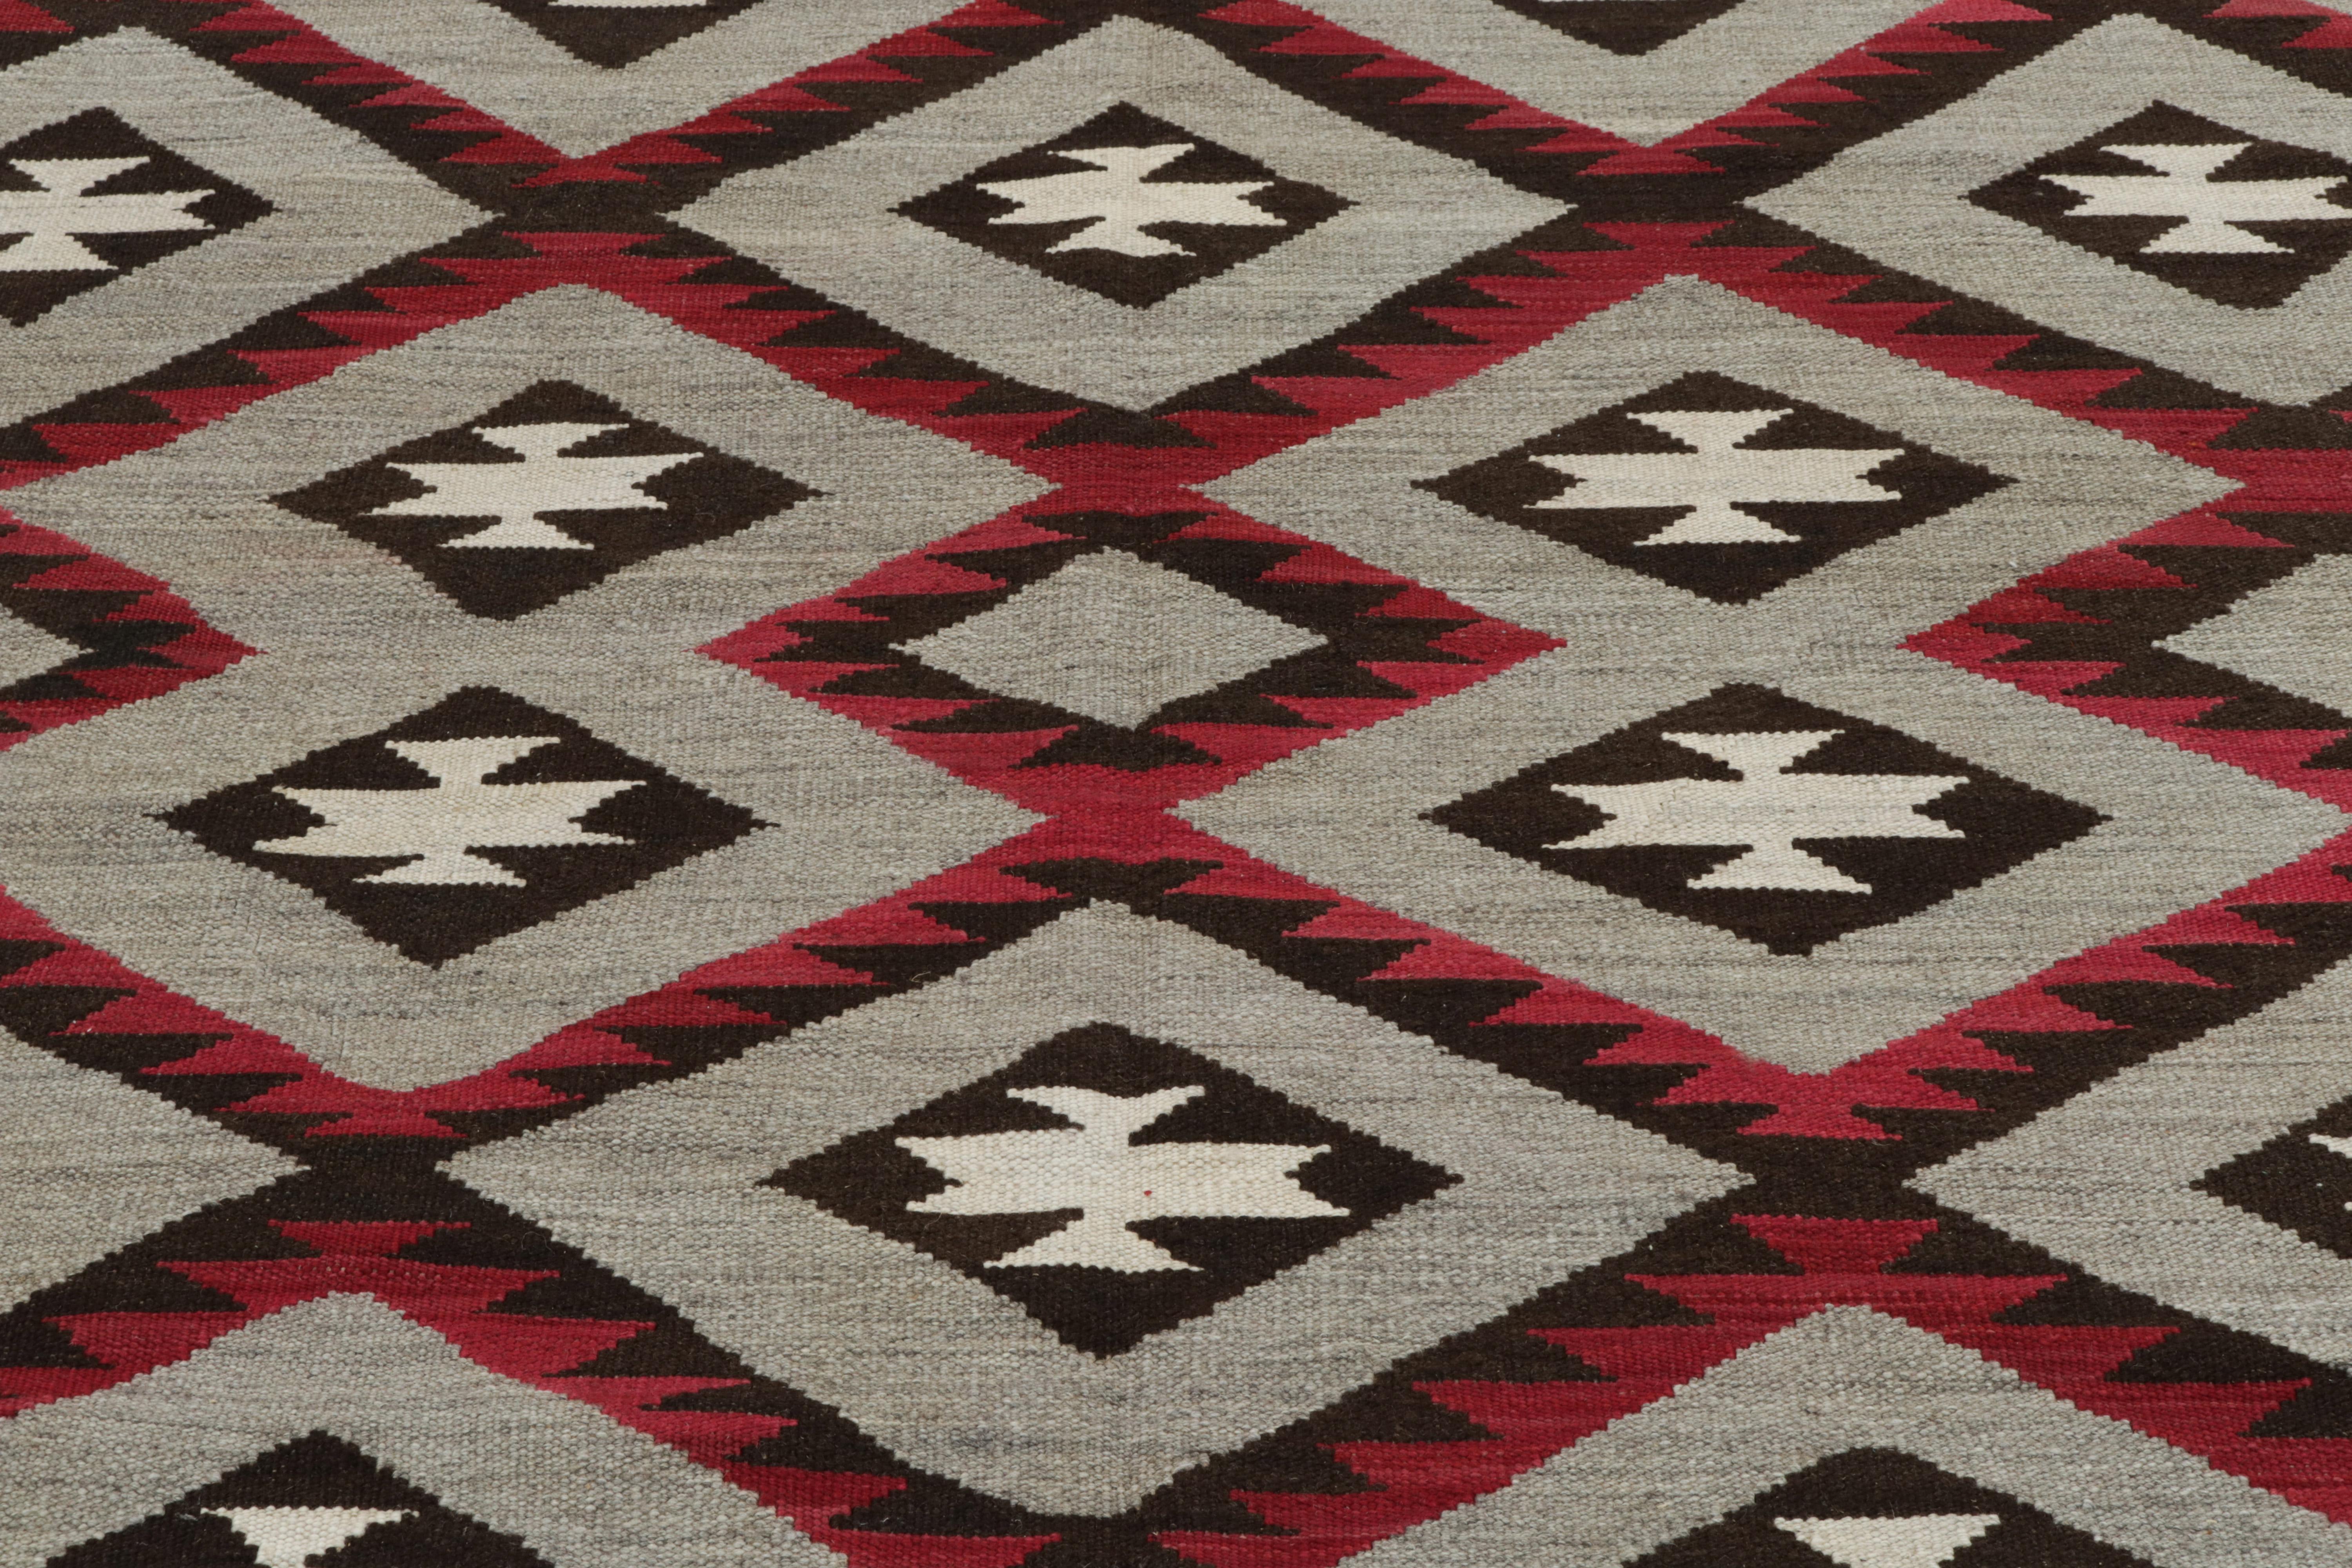 Indian Rug & Kilim's Navajo Kilim Style Rug in Gray, Red and Brown Geometric Pattern For Sale